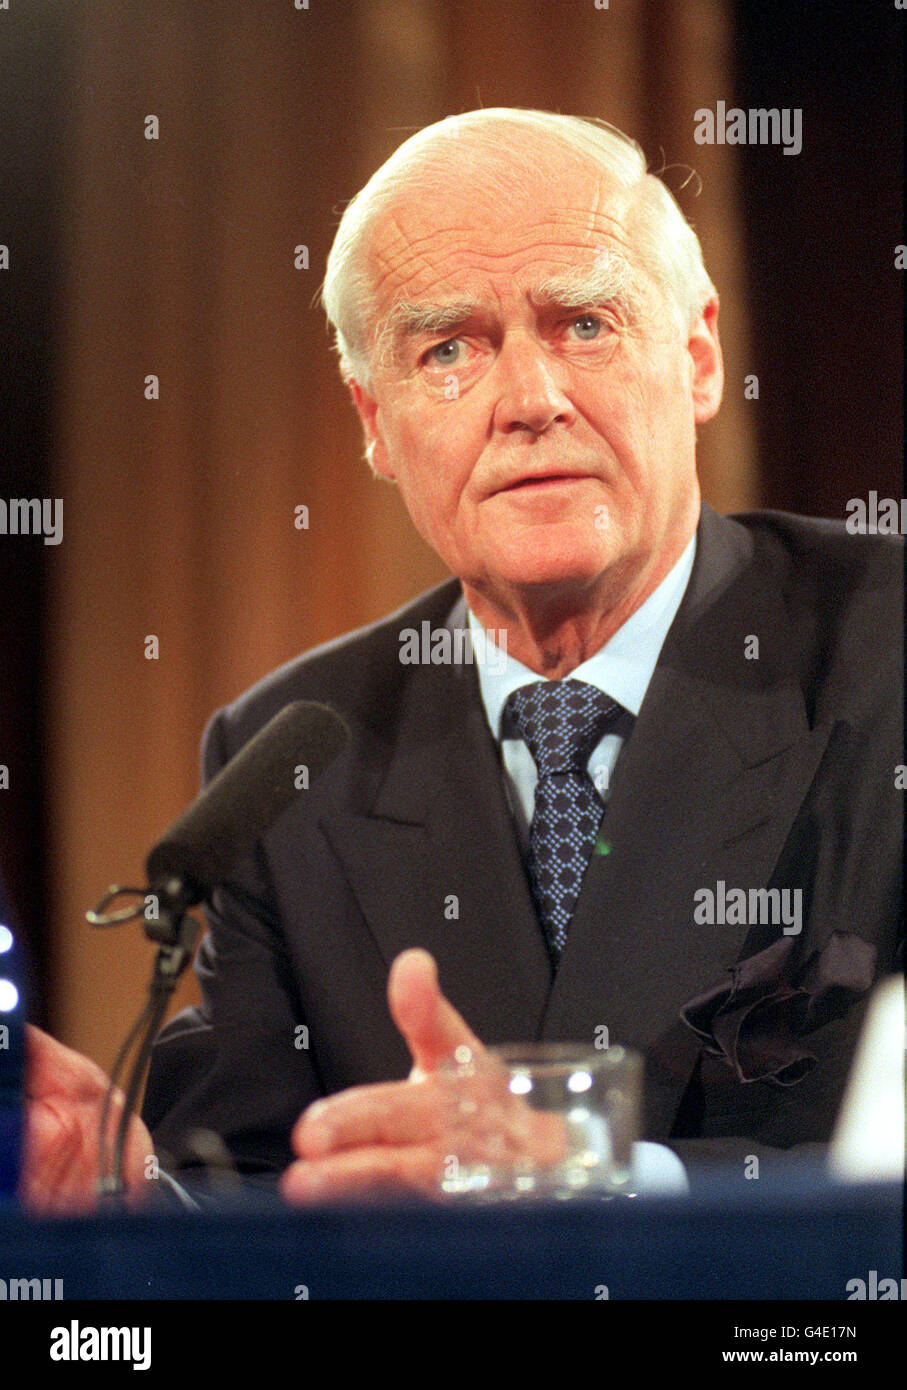 PA NEWS 28/7/98 SIR RALPH ROBINS OF ROLLS ROYCE PLC, AT A PRESS CONFERENCE WHERE BMW & VOLKSWAGON ANNOUNCED THAT THEY HAD AGREED ON THE FUTURE OF TWO GREAT CAR NAMES - ROLLYS ROYCE (MARQUE SECURED BY BMW) AND BENTLEY (MARQUE SECURED BY VOLKSWAGON). Stock Photo